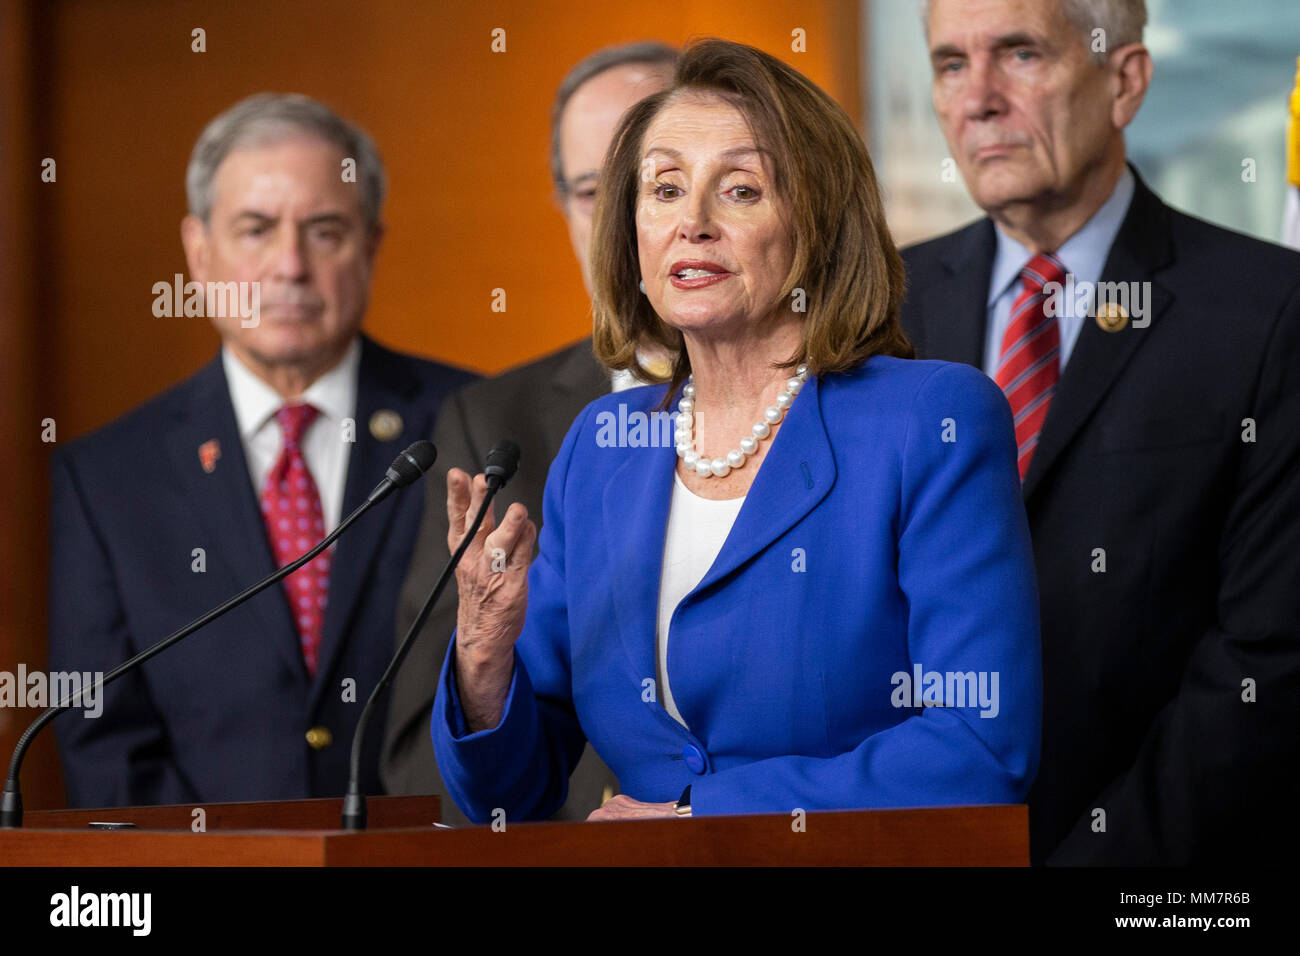 Washington, USA. 10th May, 2018. House of Representatives Democratic Leader Nancy Pelosi, Democrat of California, speaks during her weekly news conference on Capitol Hill in Washington, DC on May 10, 2018. Credit: The Photo Access/Alamy Live News Stock Photo